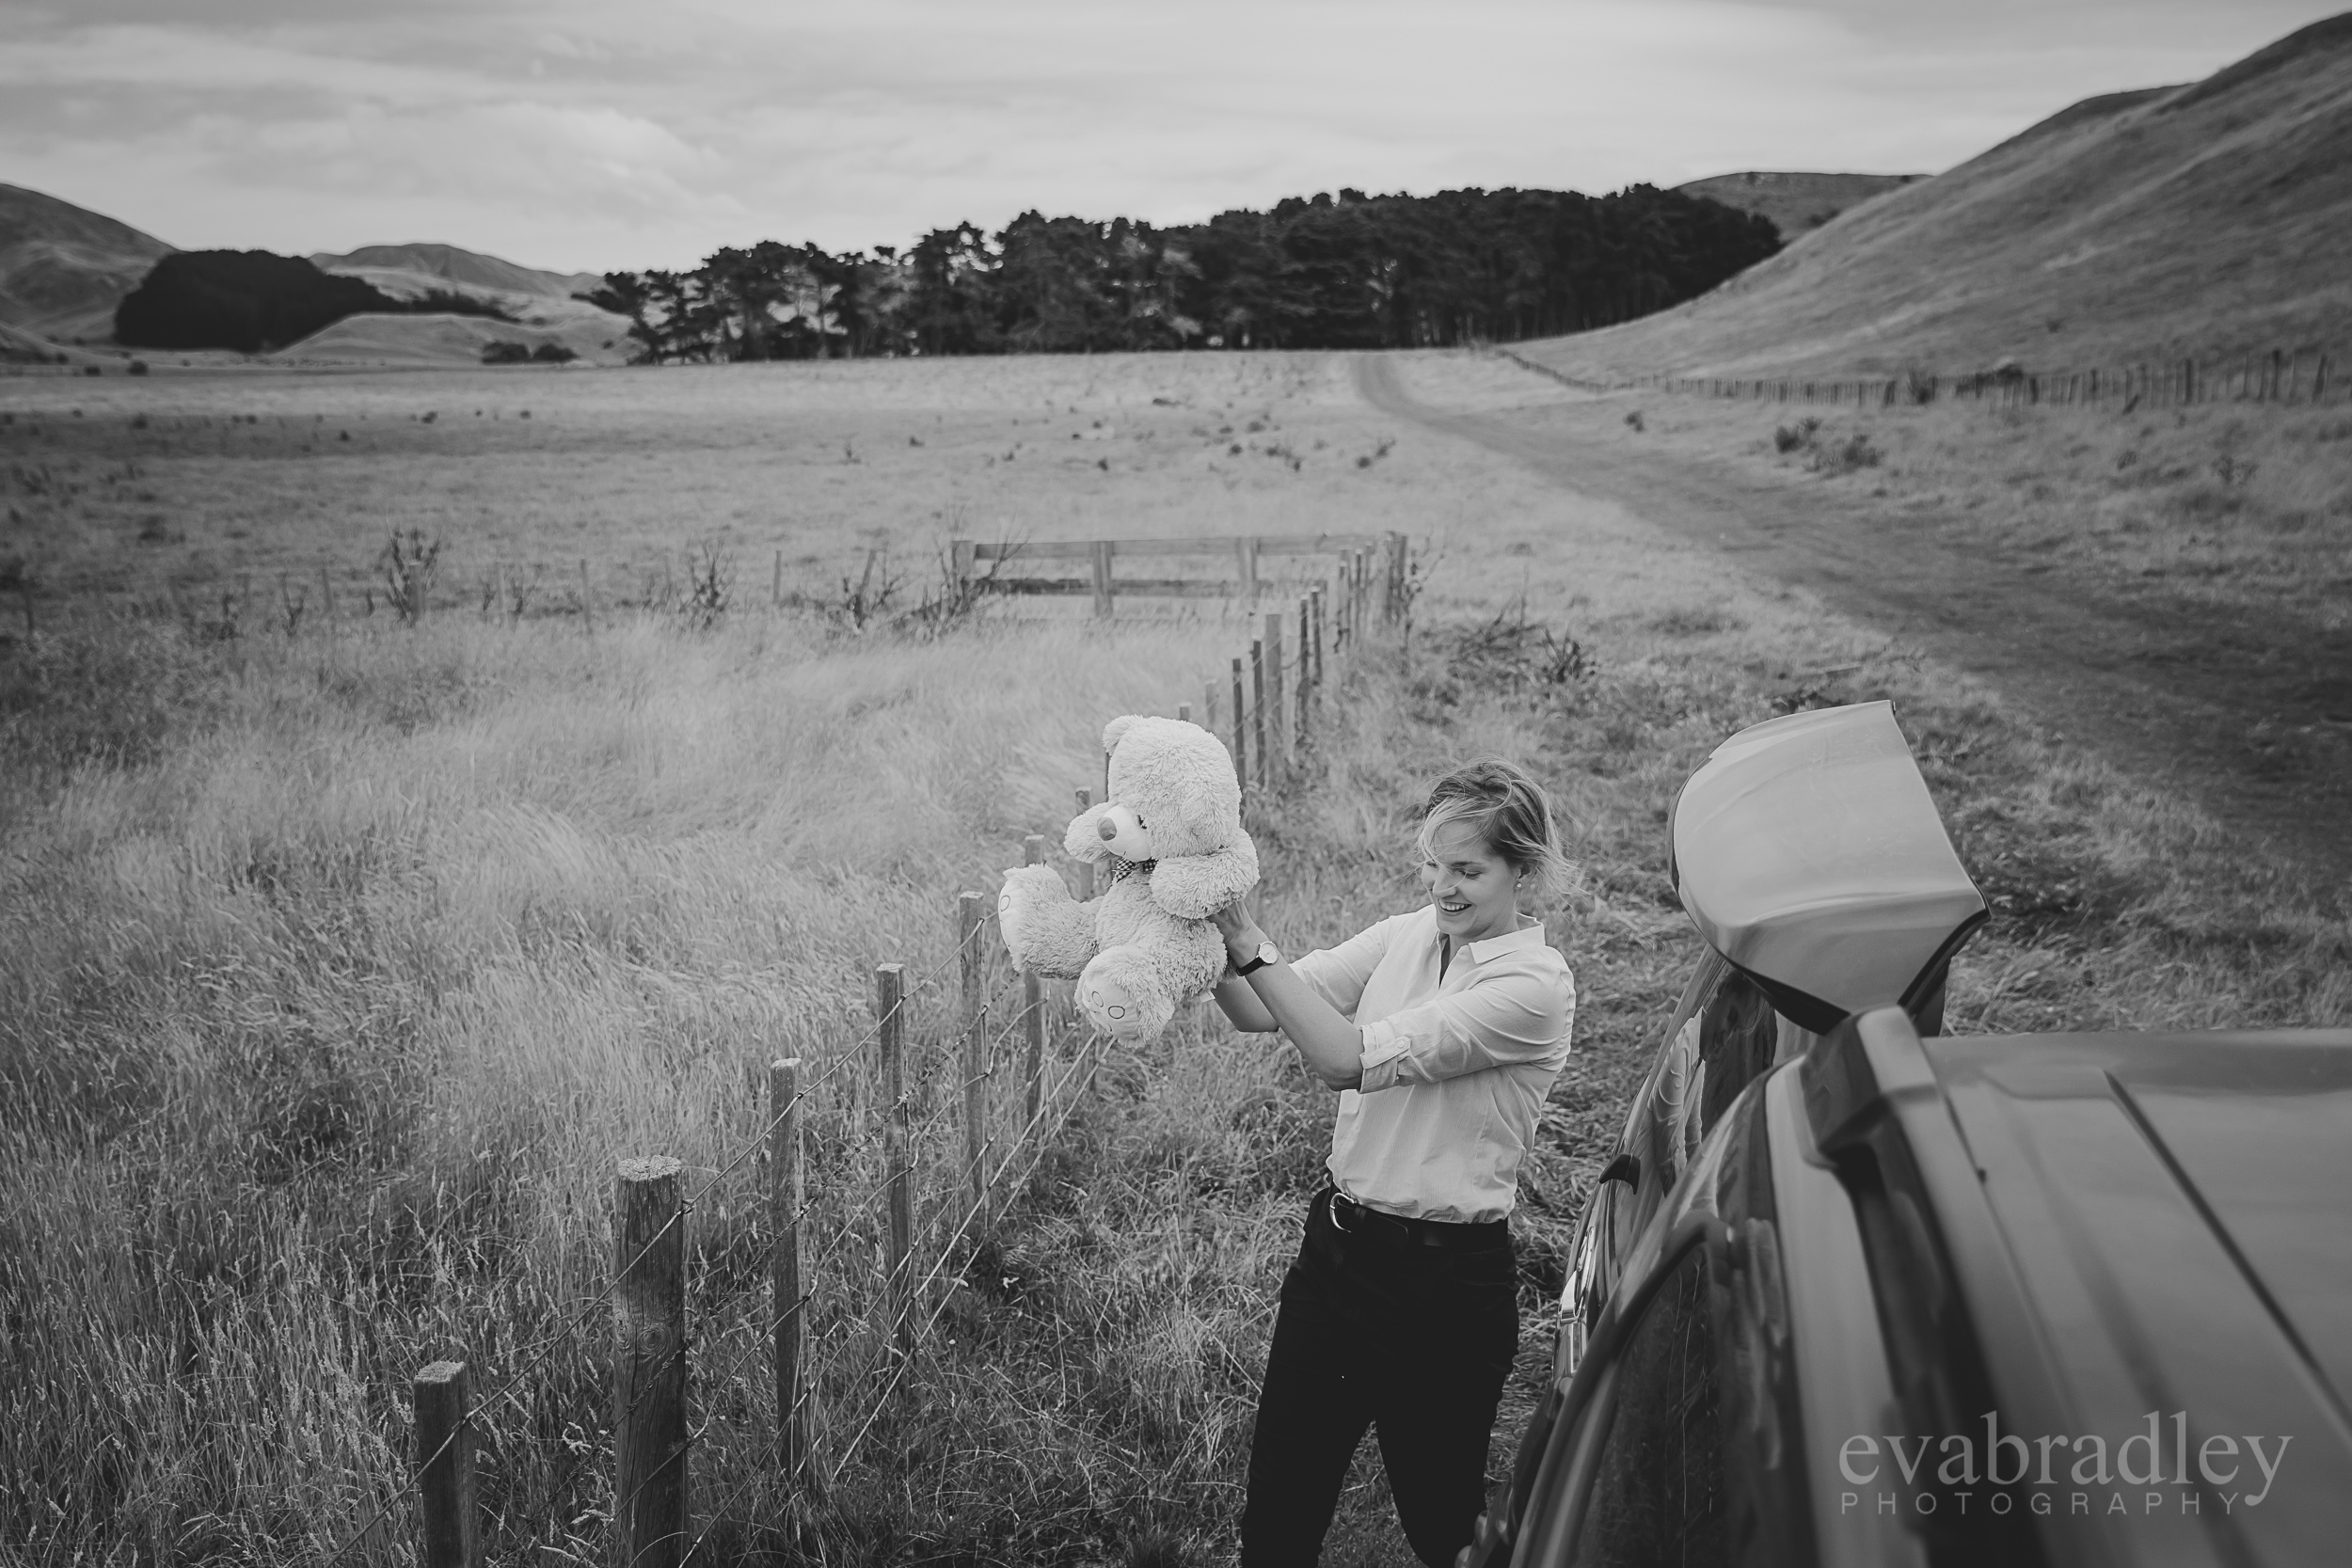 weddings-at-the-farm-cape-kidnappers-nz